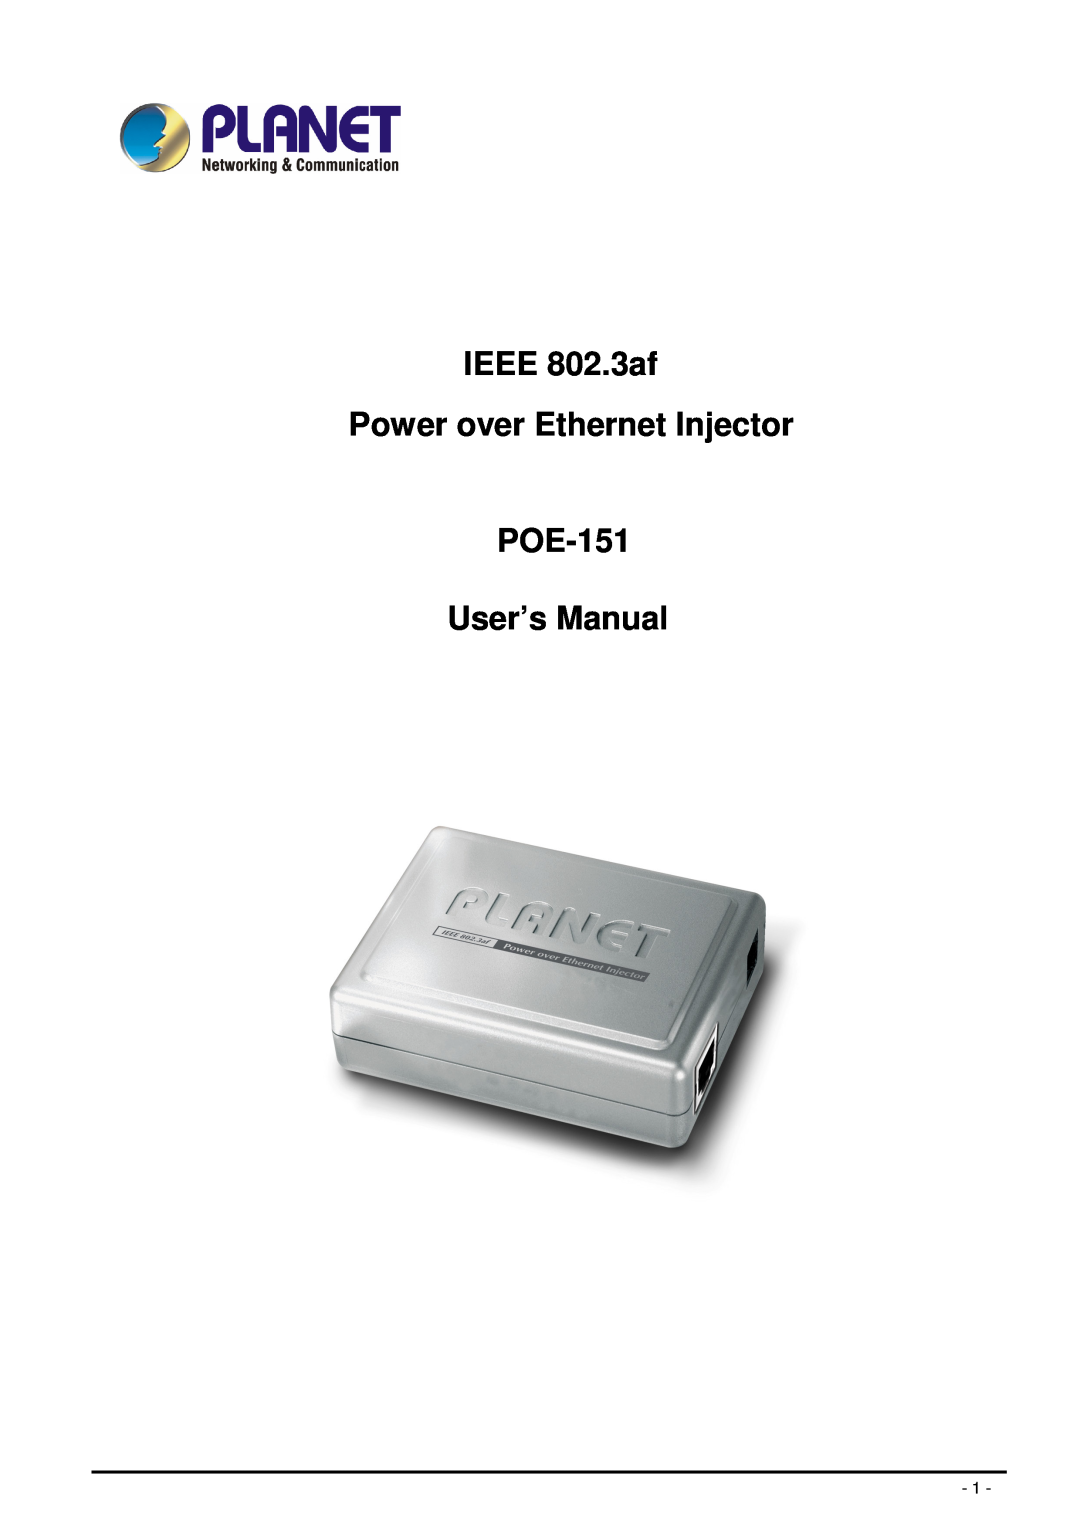 Planet Technology user manual IEEE 802.3af Power over Ethernet Injector POE-151 User’s Manual 